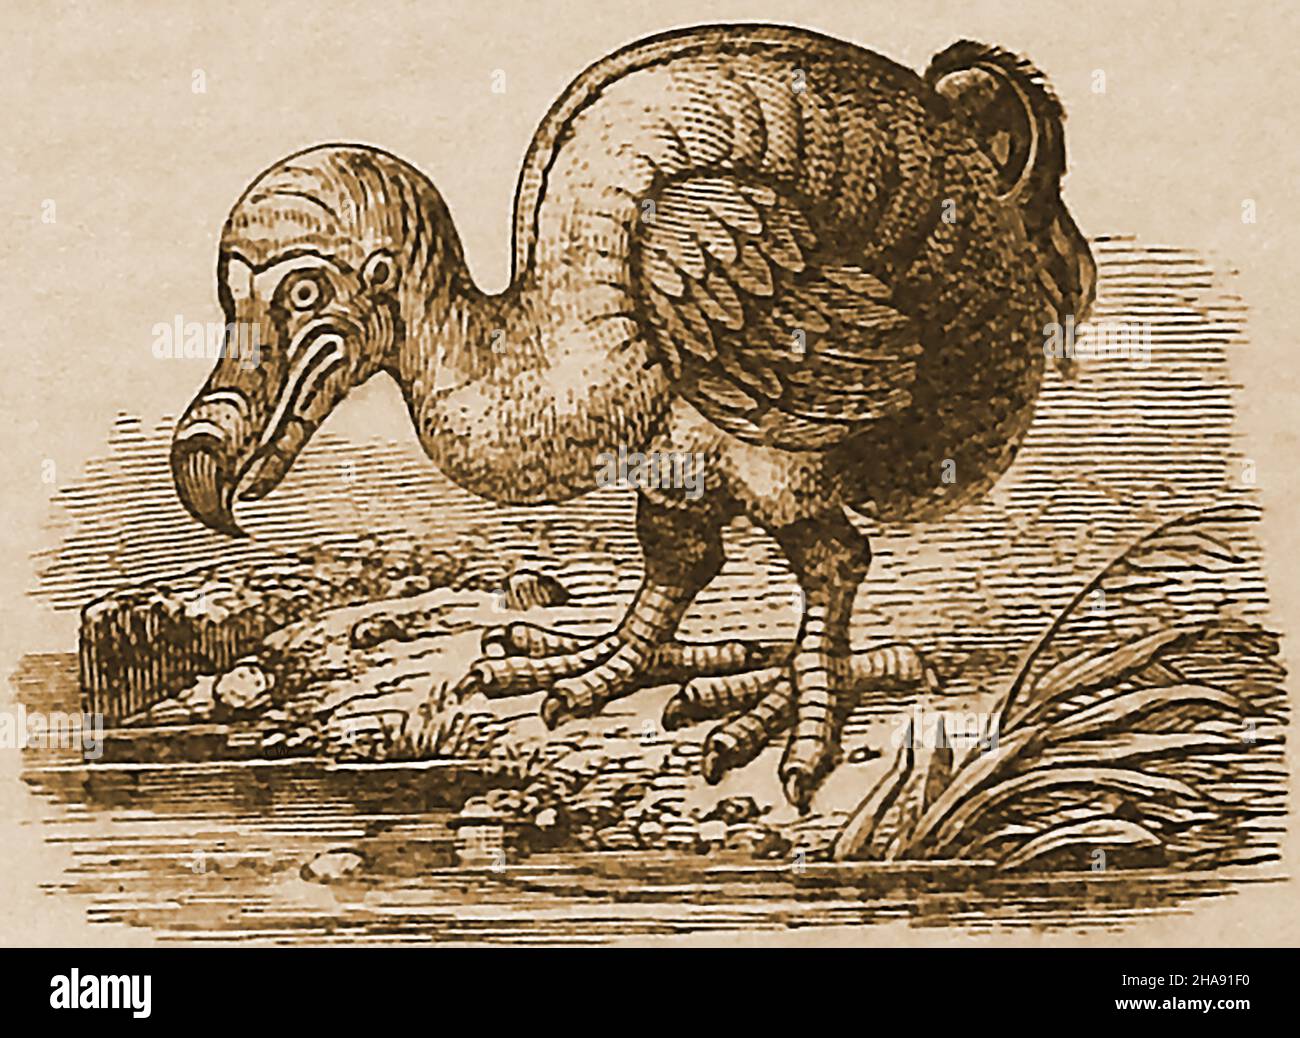 A 19th century engraving of an extinct and flightless Dodo bird. The dodo (Raphus cucullatus) was a bird that lived solely on the island of Mauritius,  (Indian Ocean). Its  closest genetic relative was the  Rodrigues solitaire (now also extinct) that lived on the nearby island of  Rodrigues. The first recorded mention of the dodo was by Dutch sailors in 1598. The once  abundant bird  and its single egg were evidently good eating leading to it being hunted by successive groups of visiting sailors leading to its extinction some time soon after 1662 when it was last sighted. Stock Photo